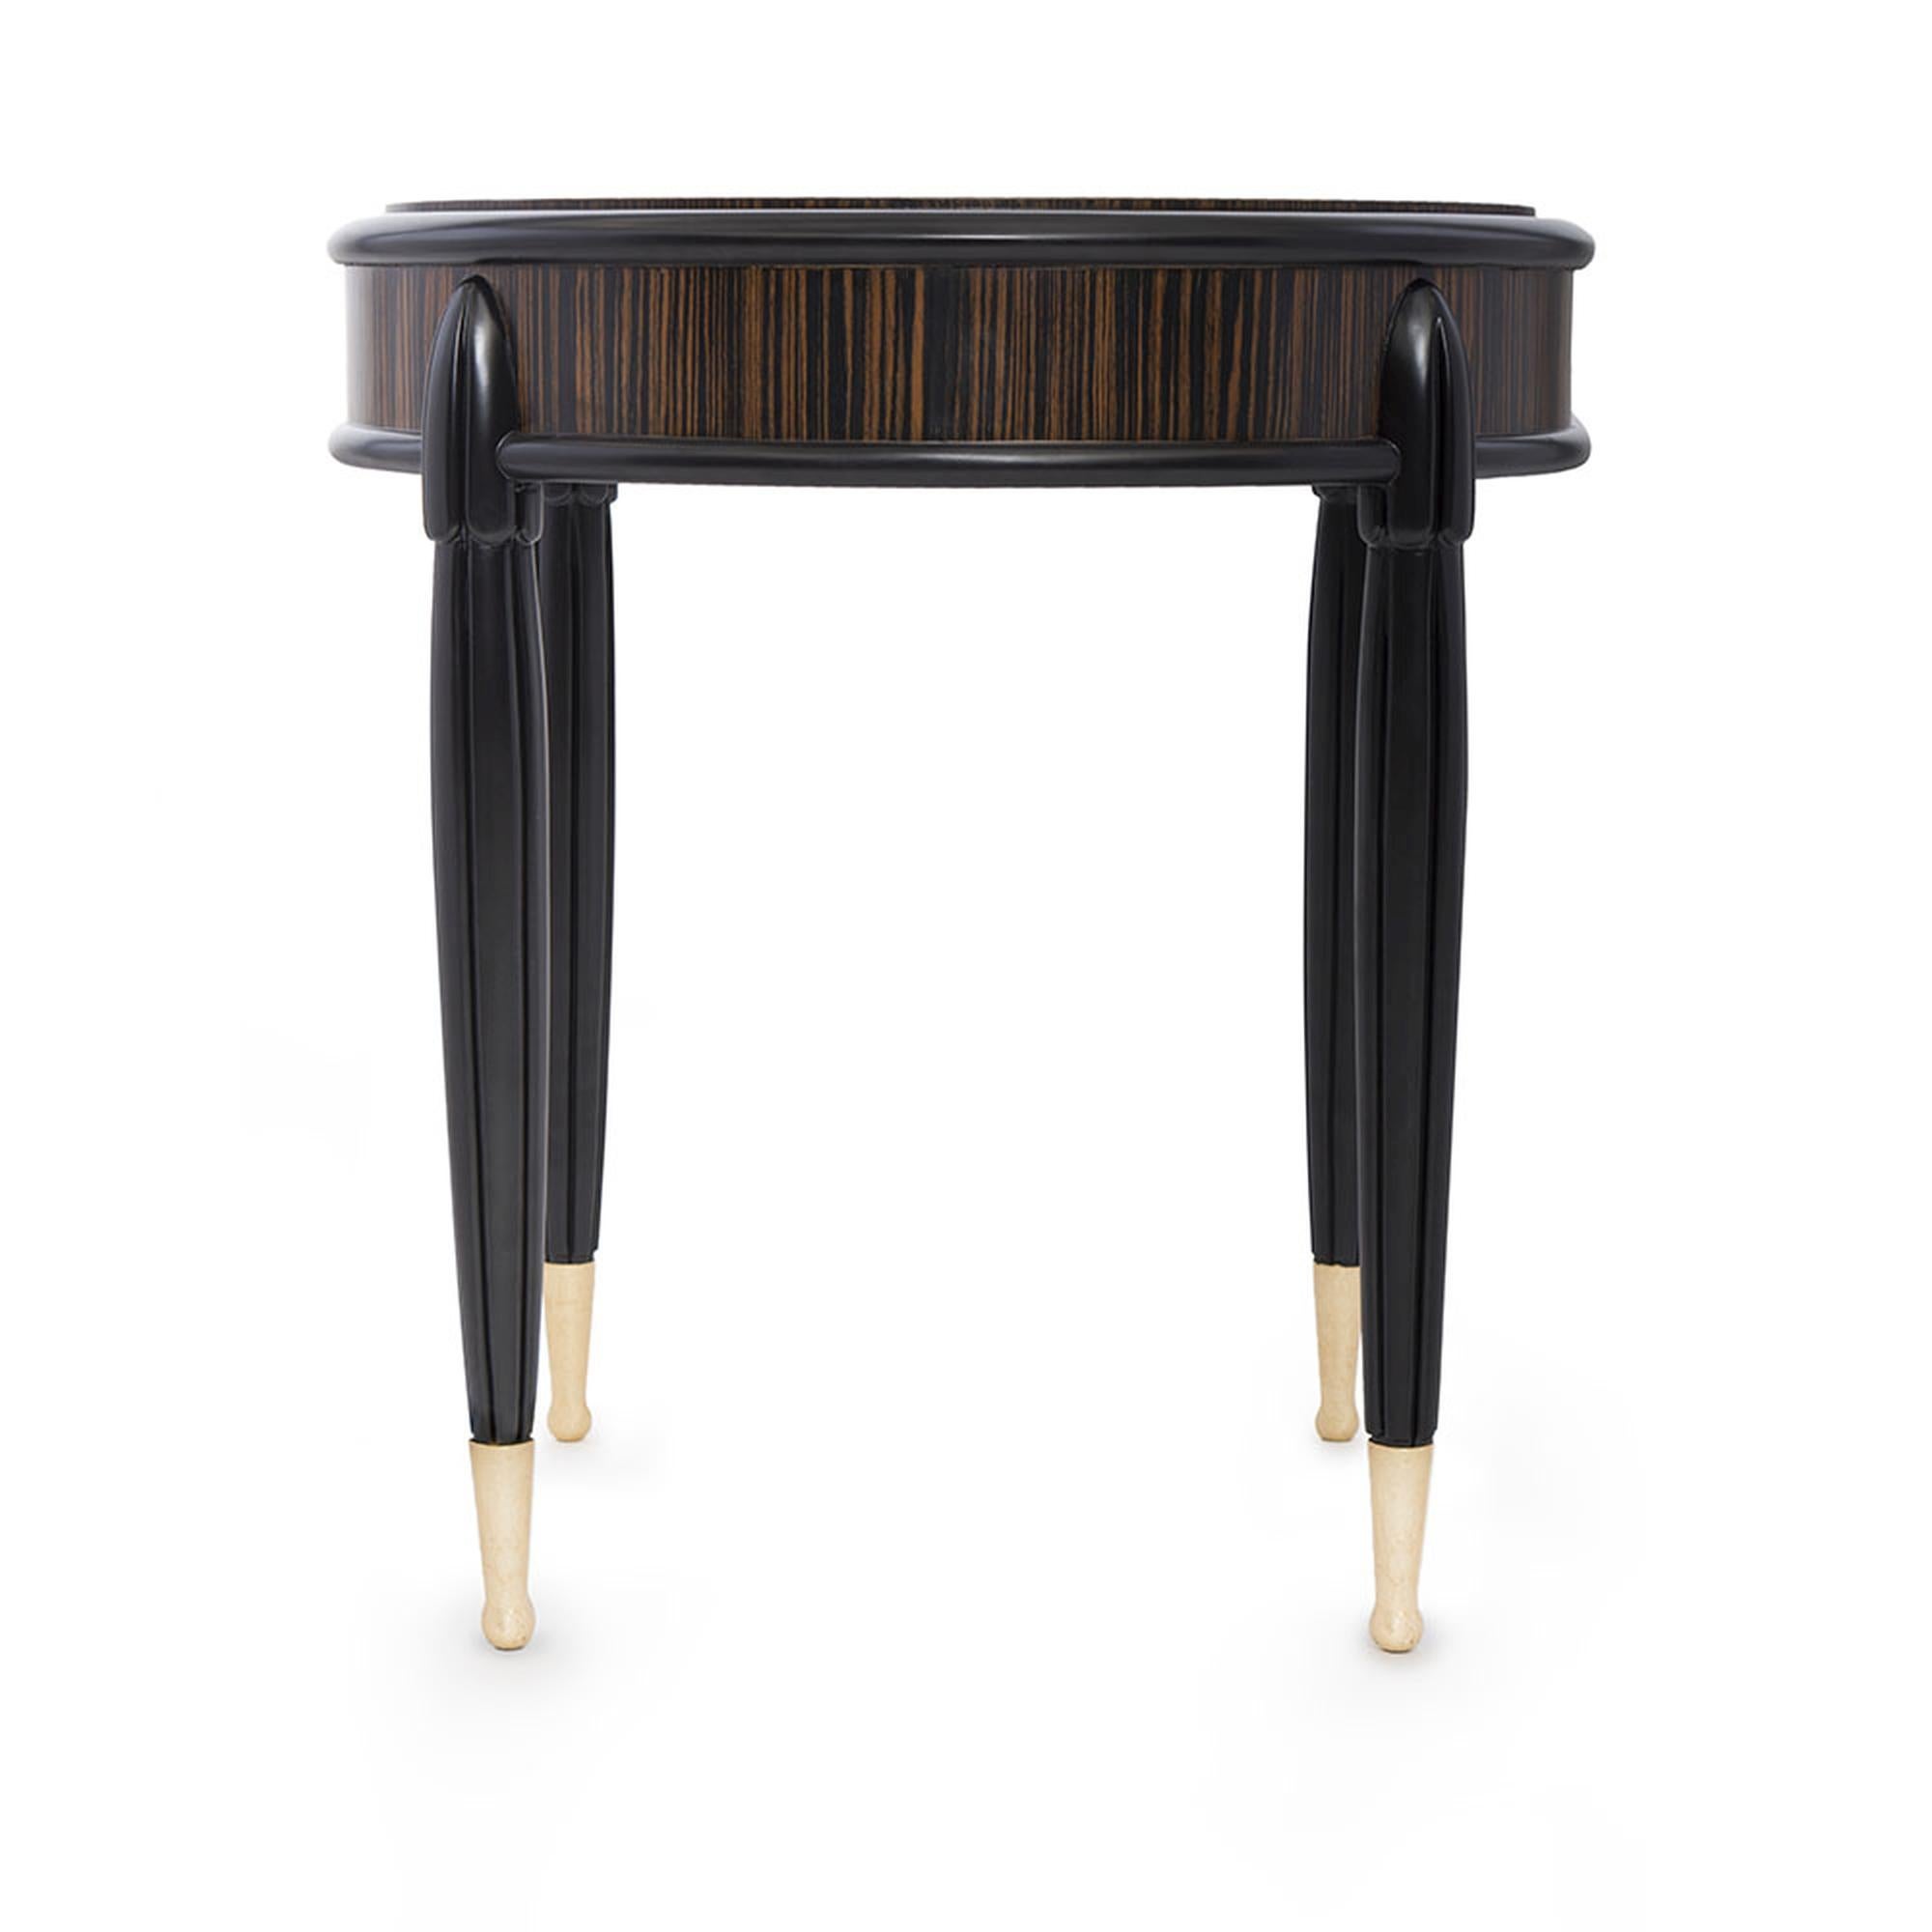 The Marmont Side Table is an elegant addition to any home. Crafted with a gorgeous ebony Macassar wood veneer top and four matte wood nished legs, this table is clean, stylish, and versatile. It is detailed with gold leaf accents at the base of the